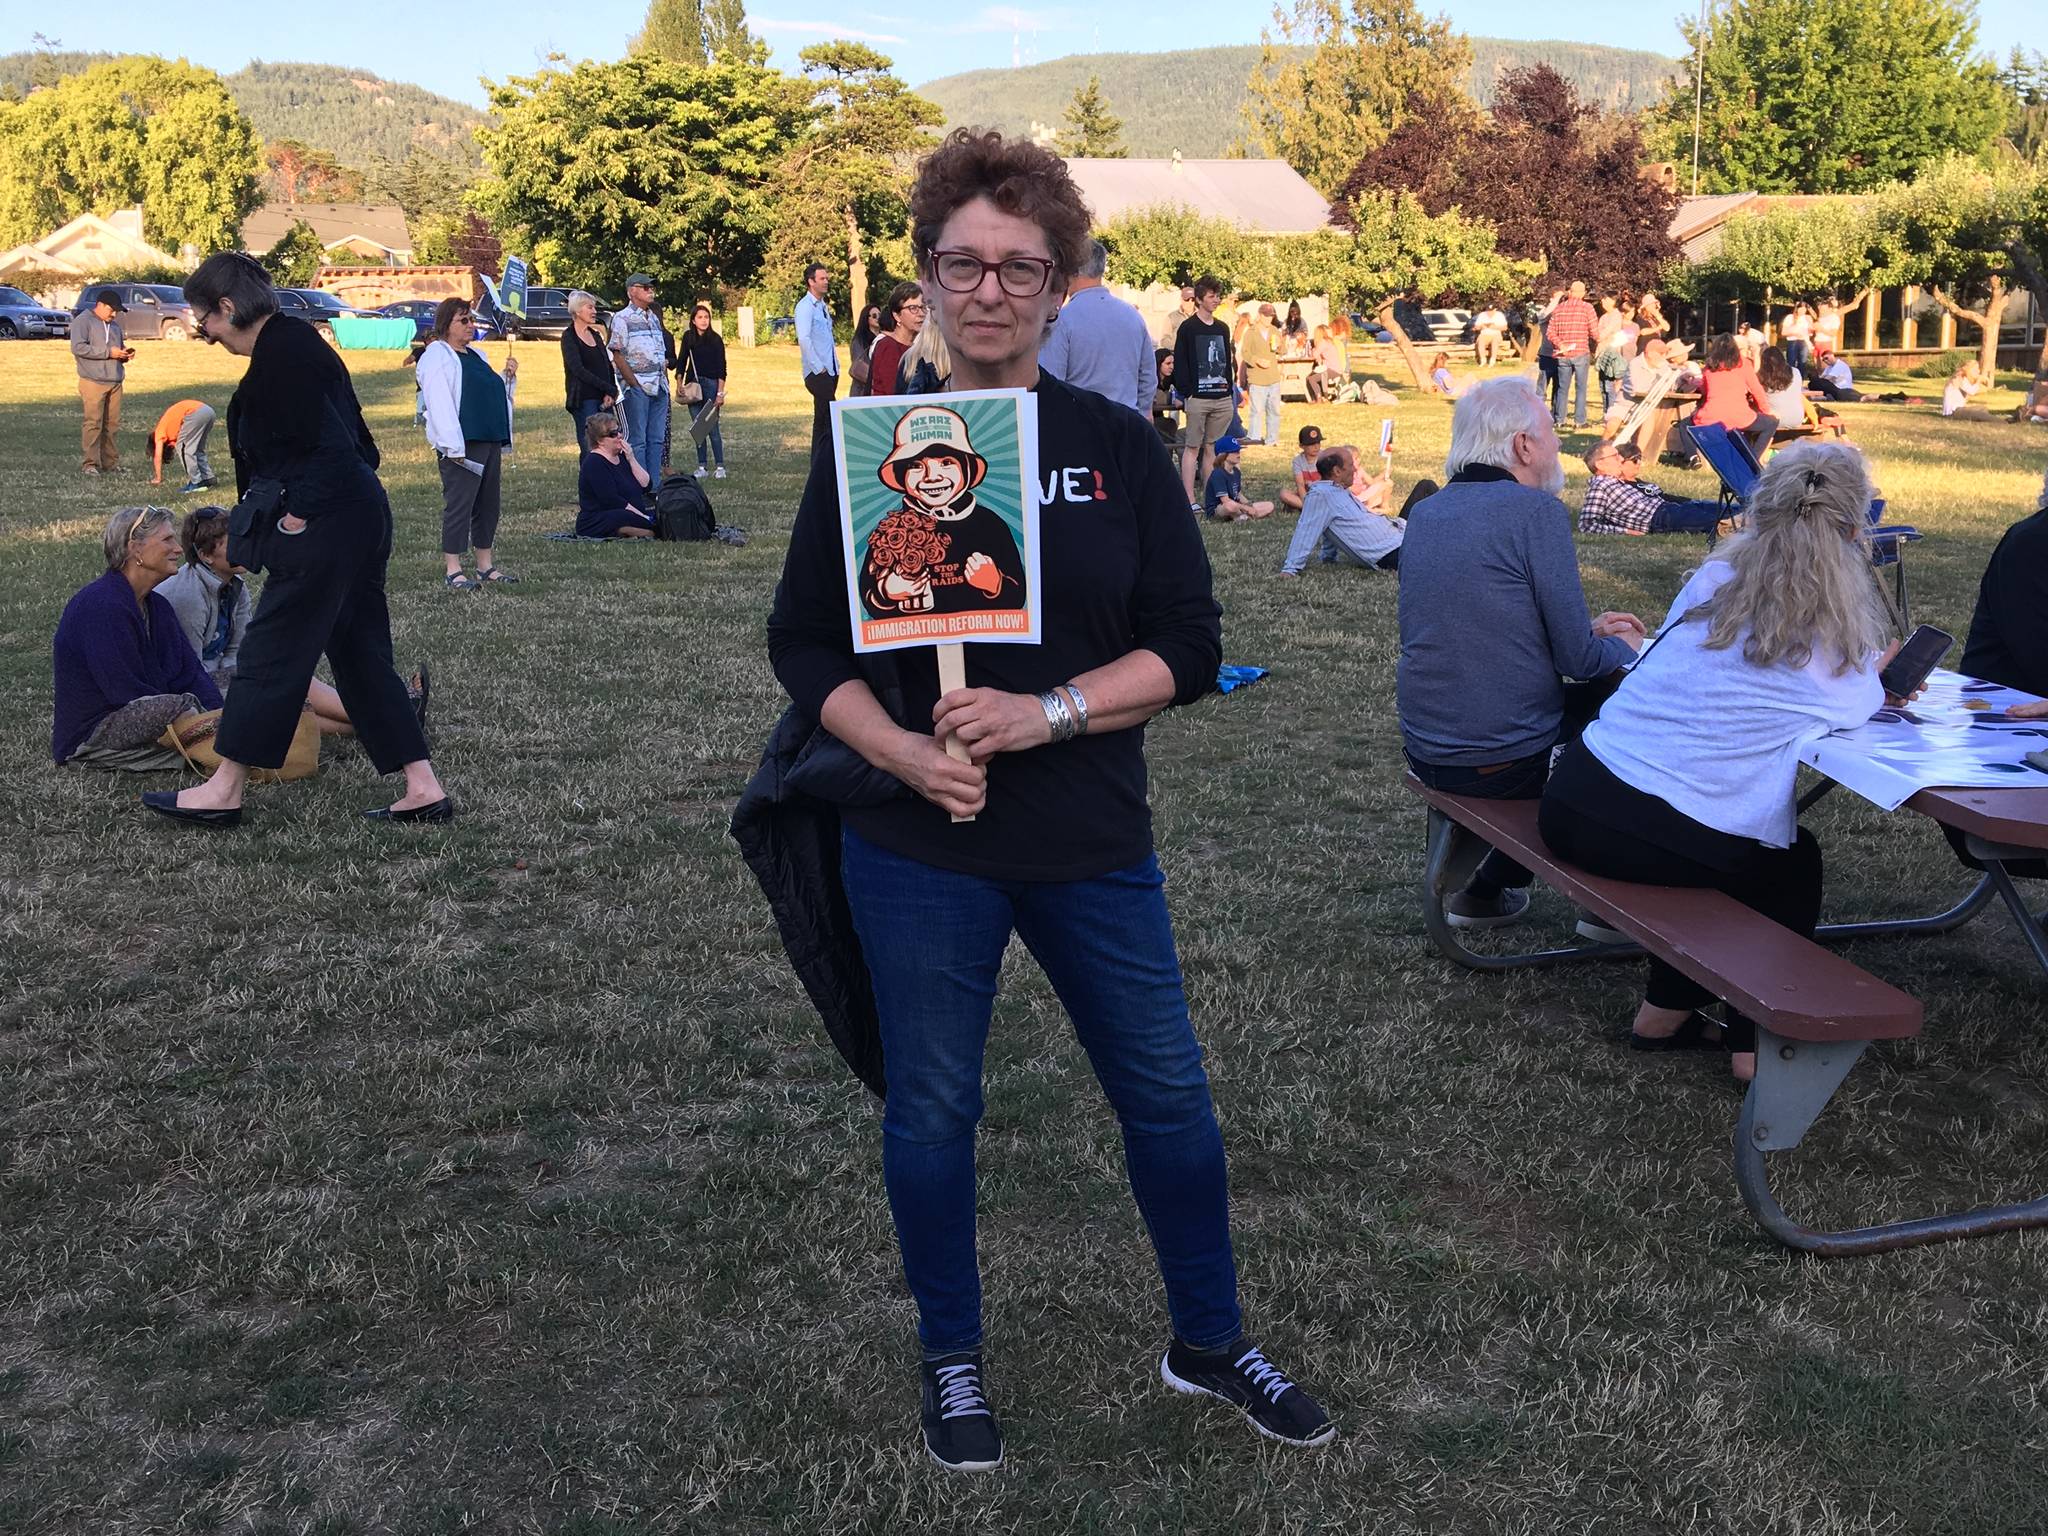 Local speakers inspire action at local vigil protest of ICE detainment camps